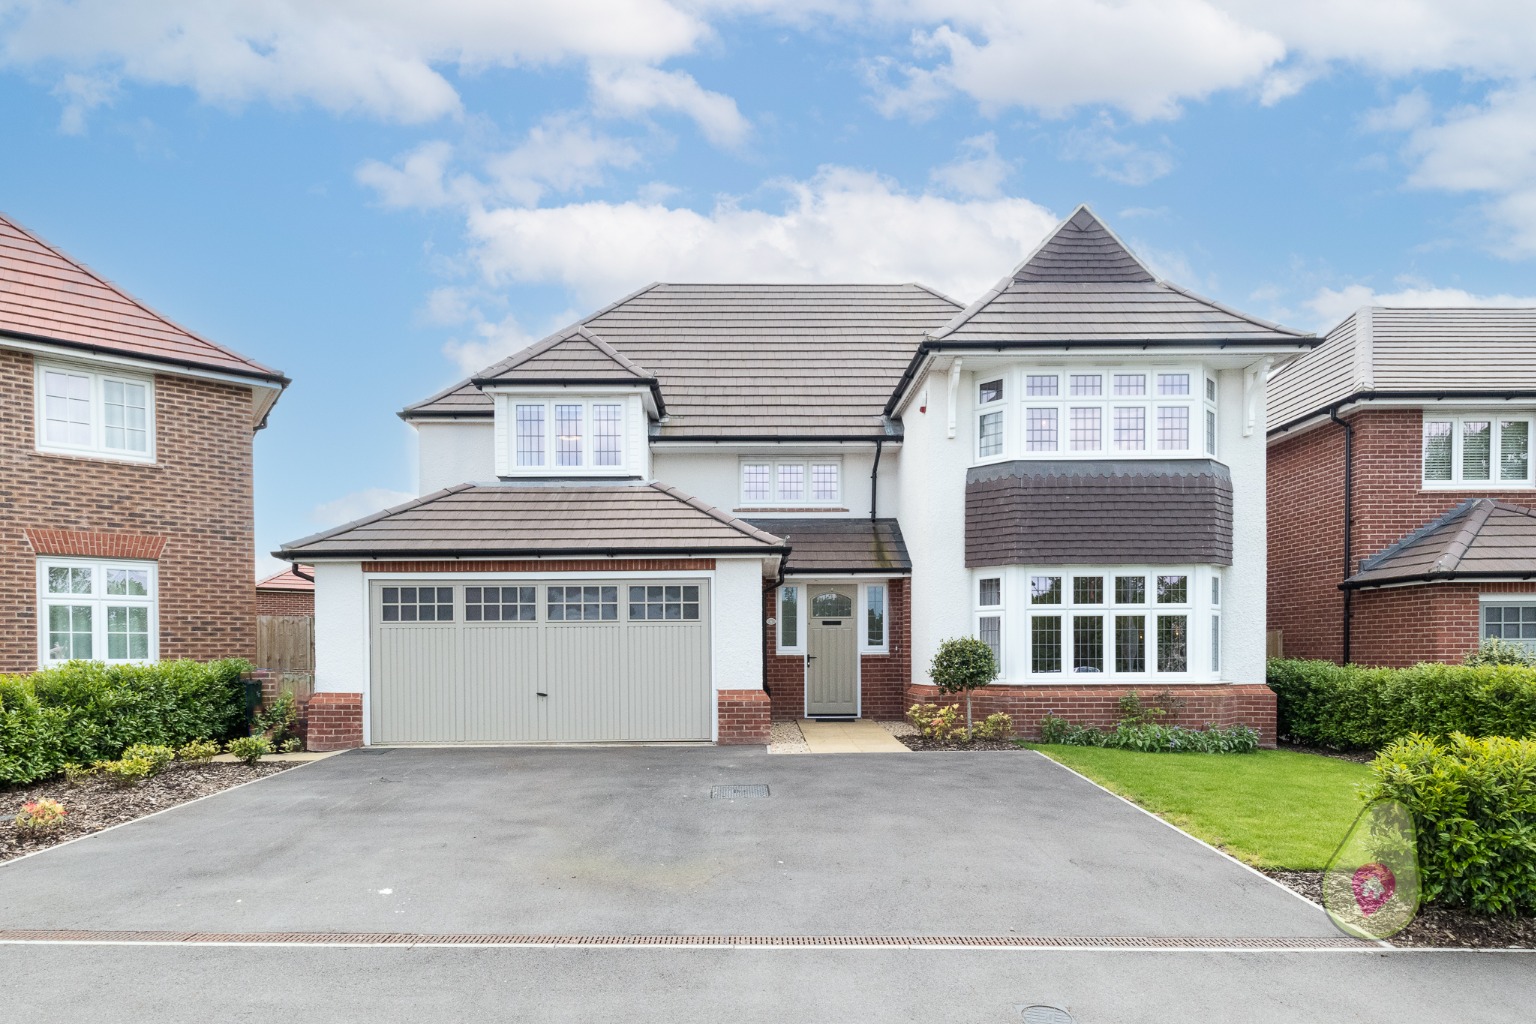 4 bed detached house for sale in Galton Way, Bracknell - Property Image 1